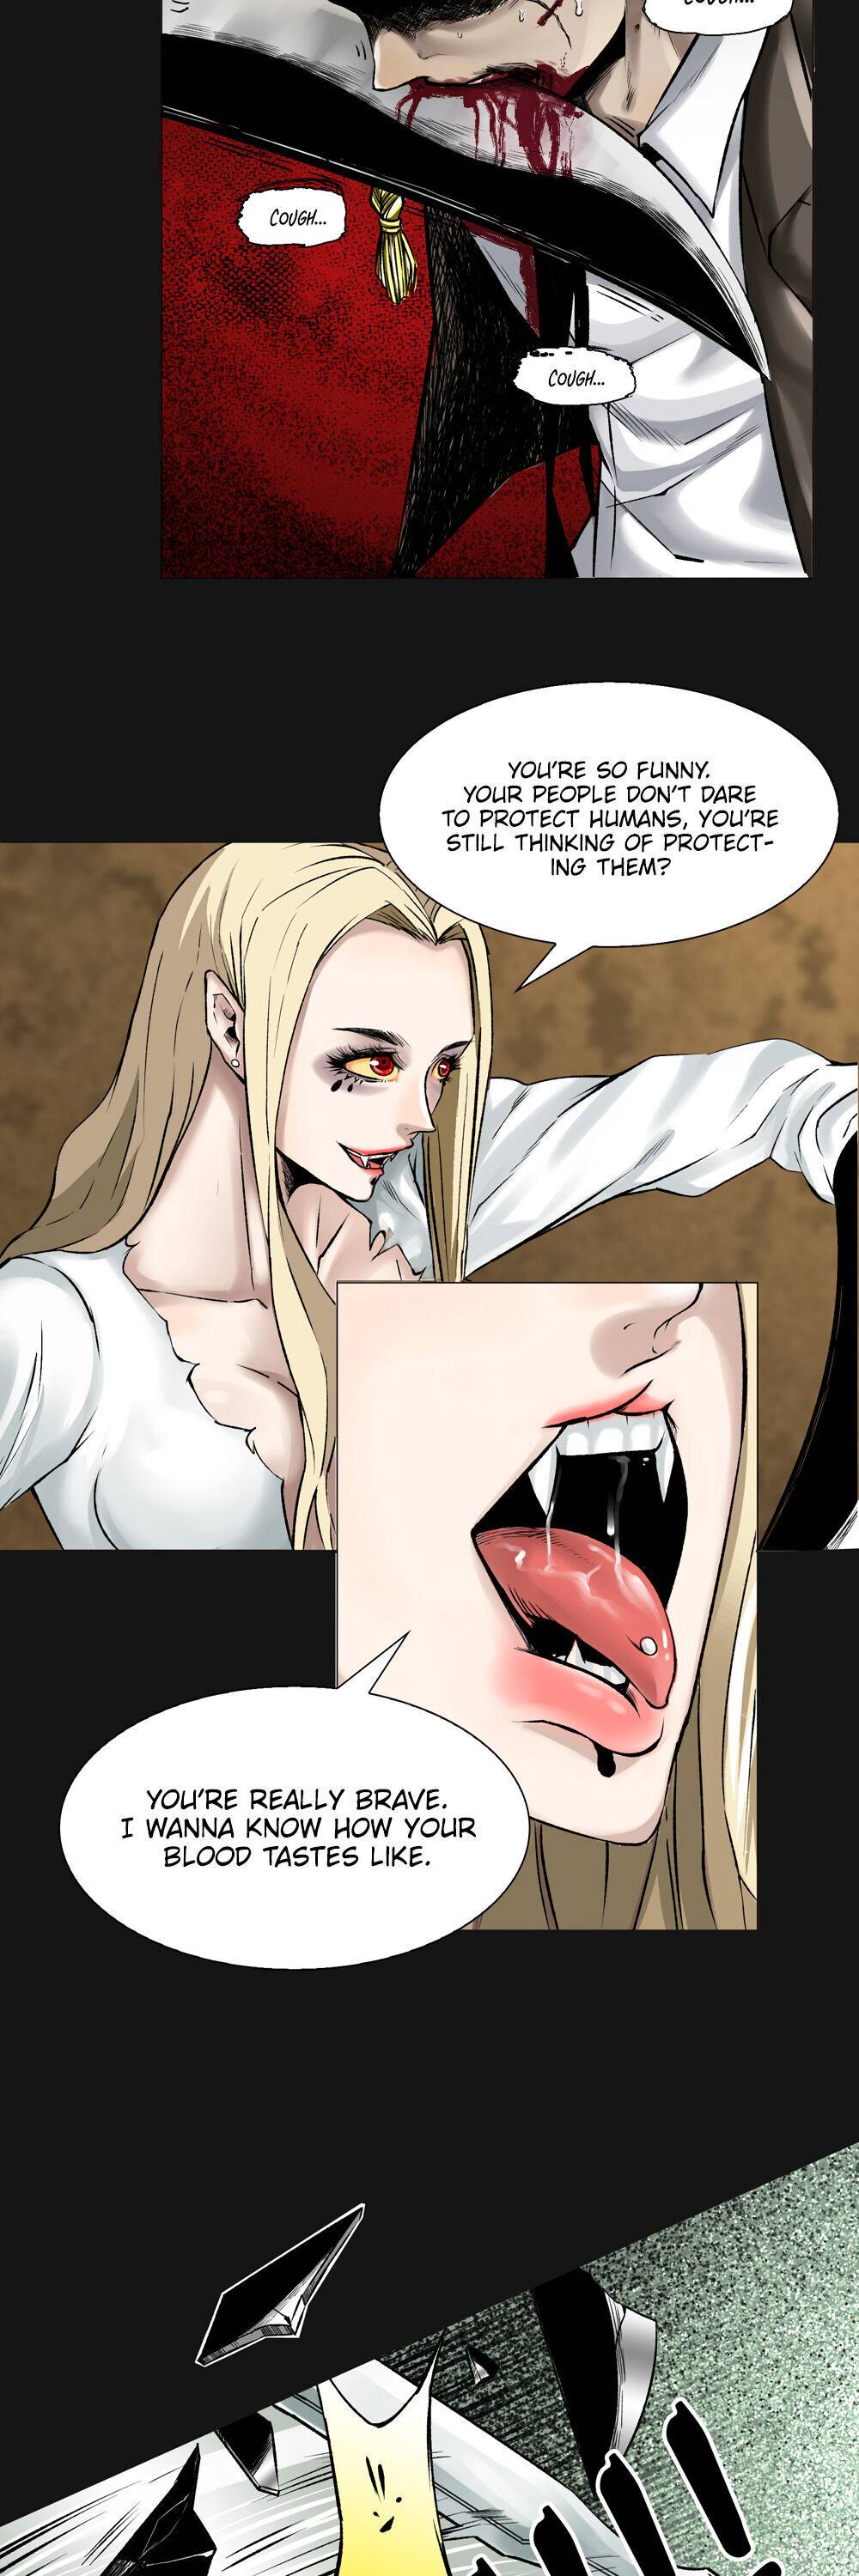 I’M A Human, But More Of A Vampire - Page 2